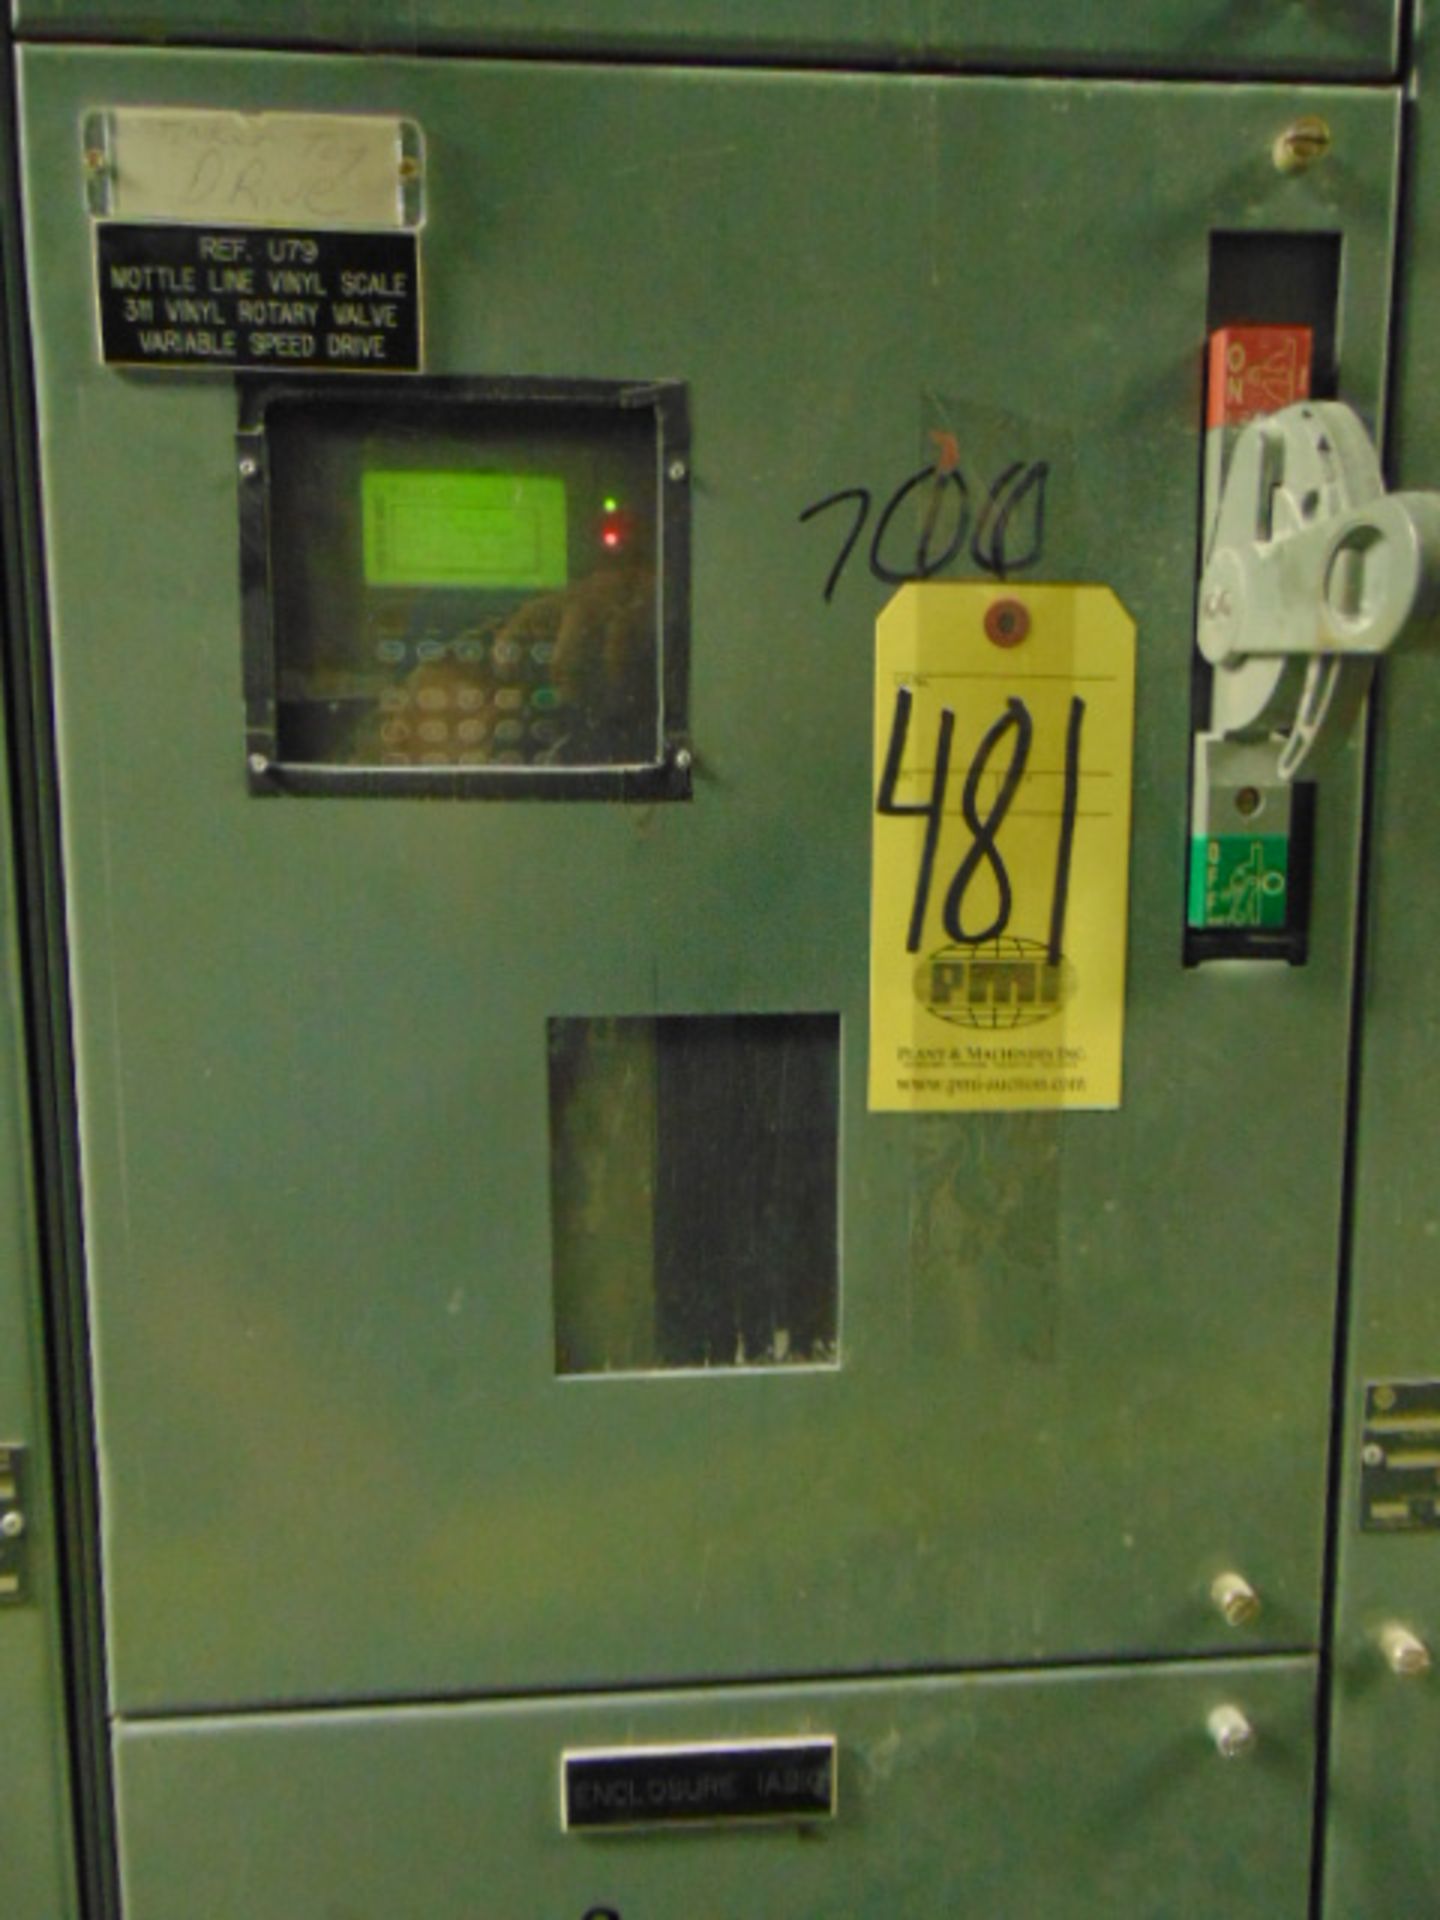 AC VARIABLE FREQUENCY DRIVE, ALLEN BRADLEY POWERFLEX MDL. 700 (located on roof) (Note: has been